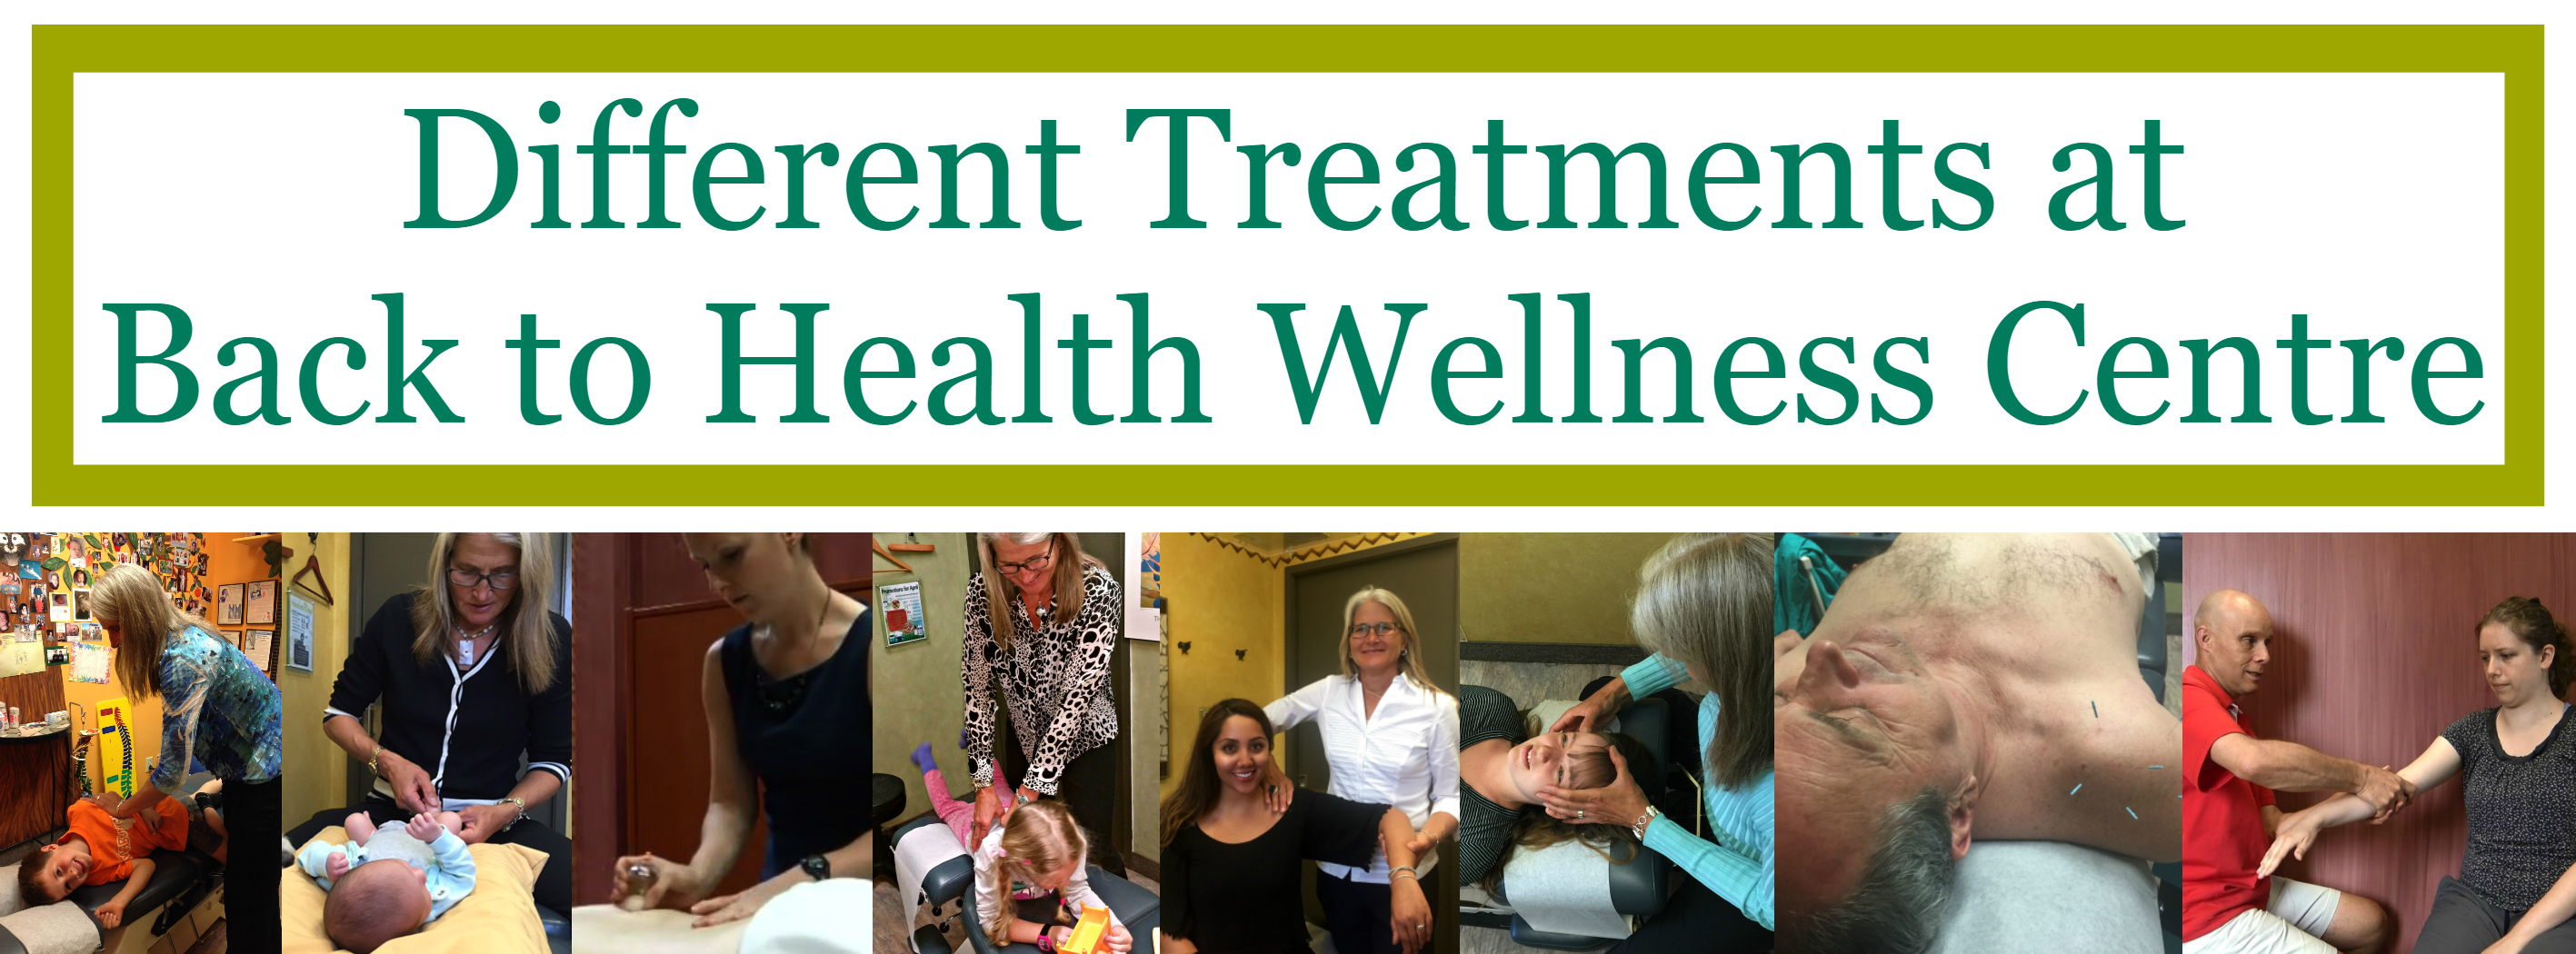 Different Treatments at Back to Health